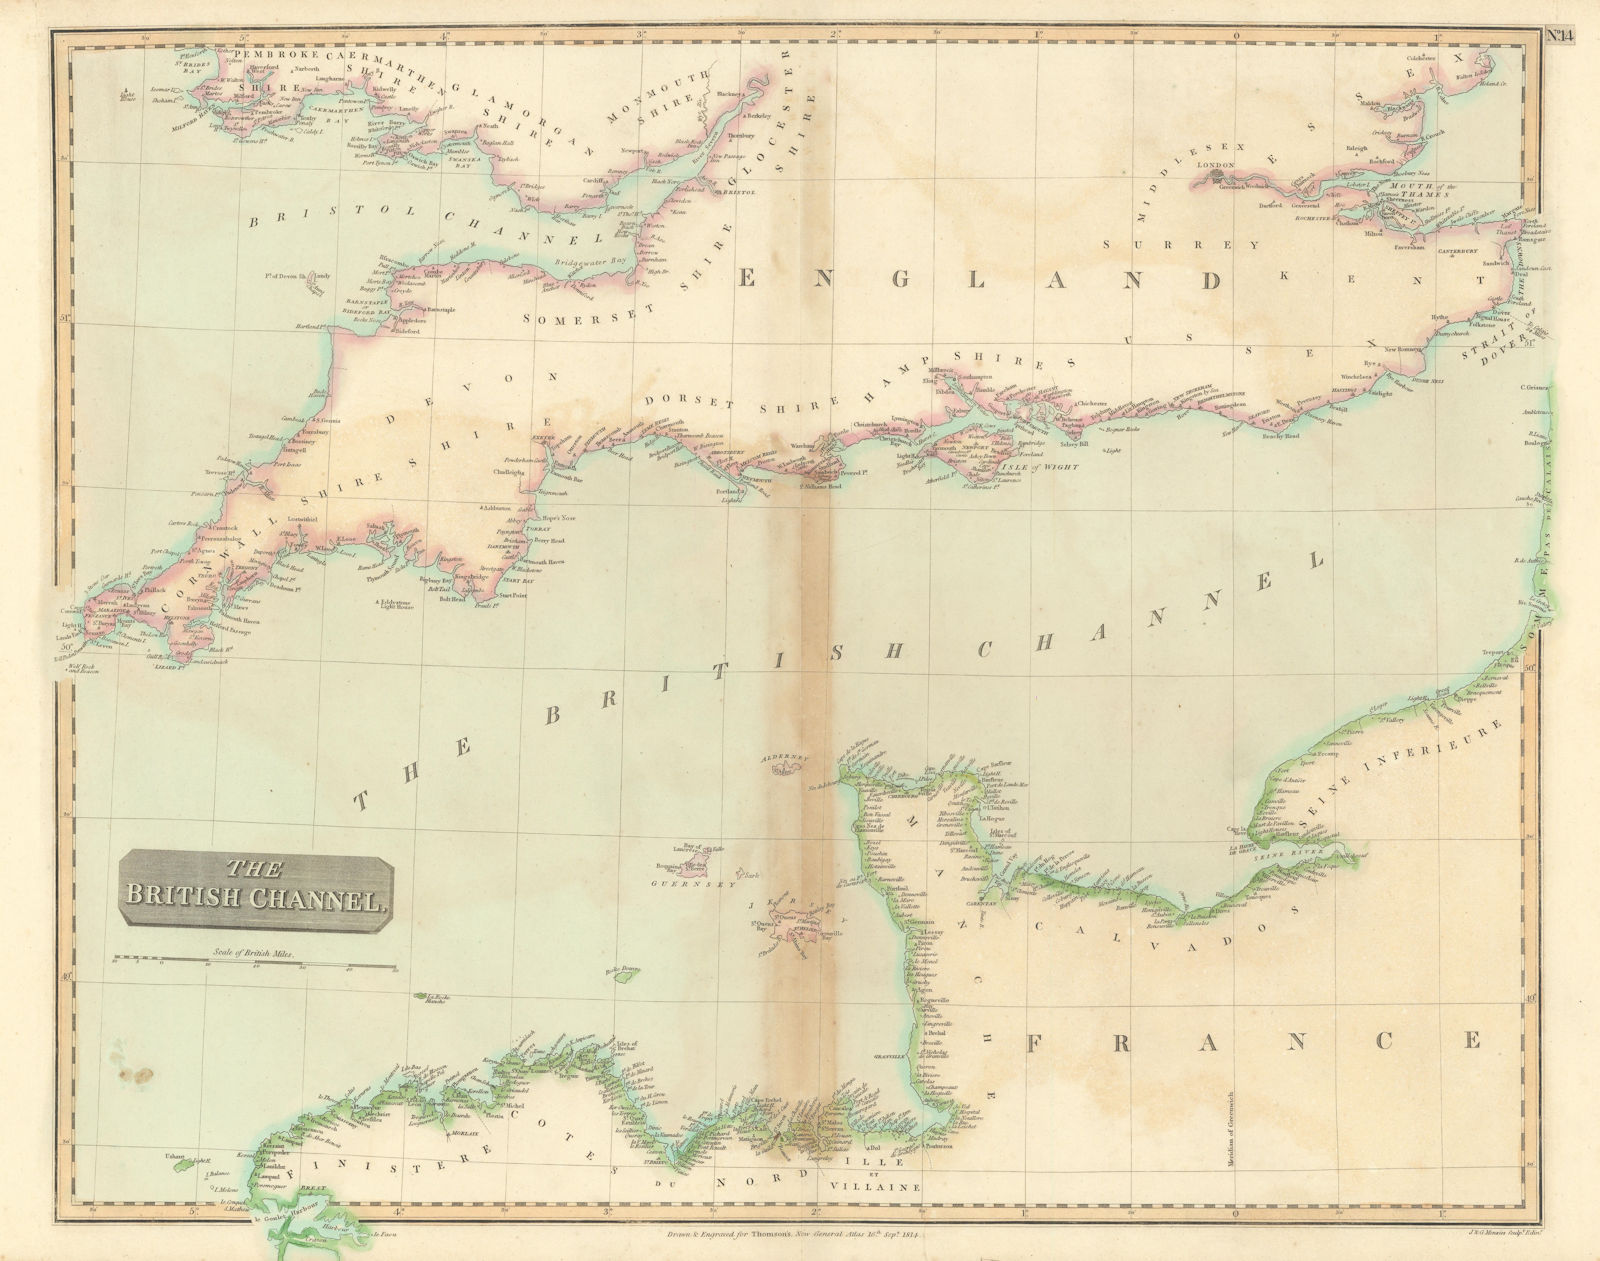 "The British Channel" by John Thomson. English Channel. Manche 1817 old map